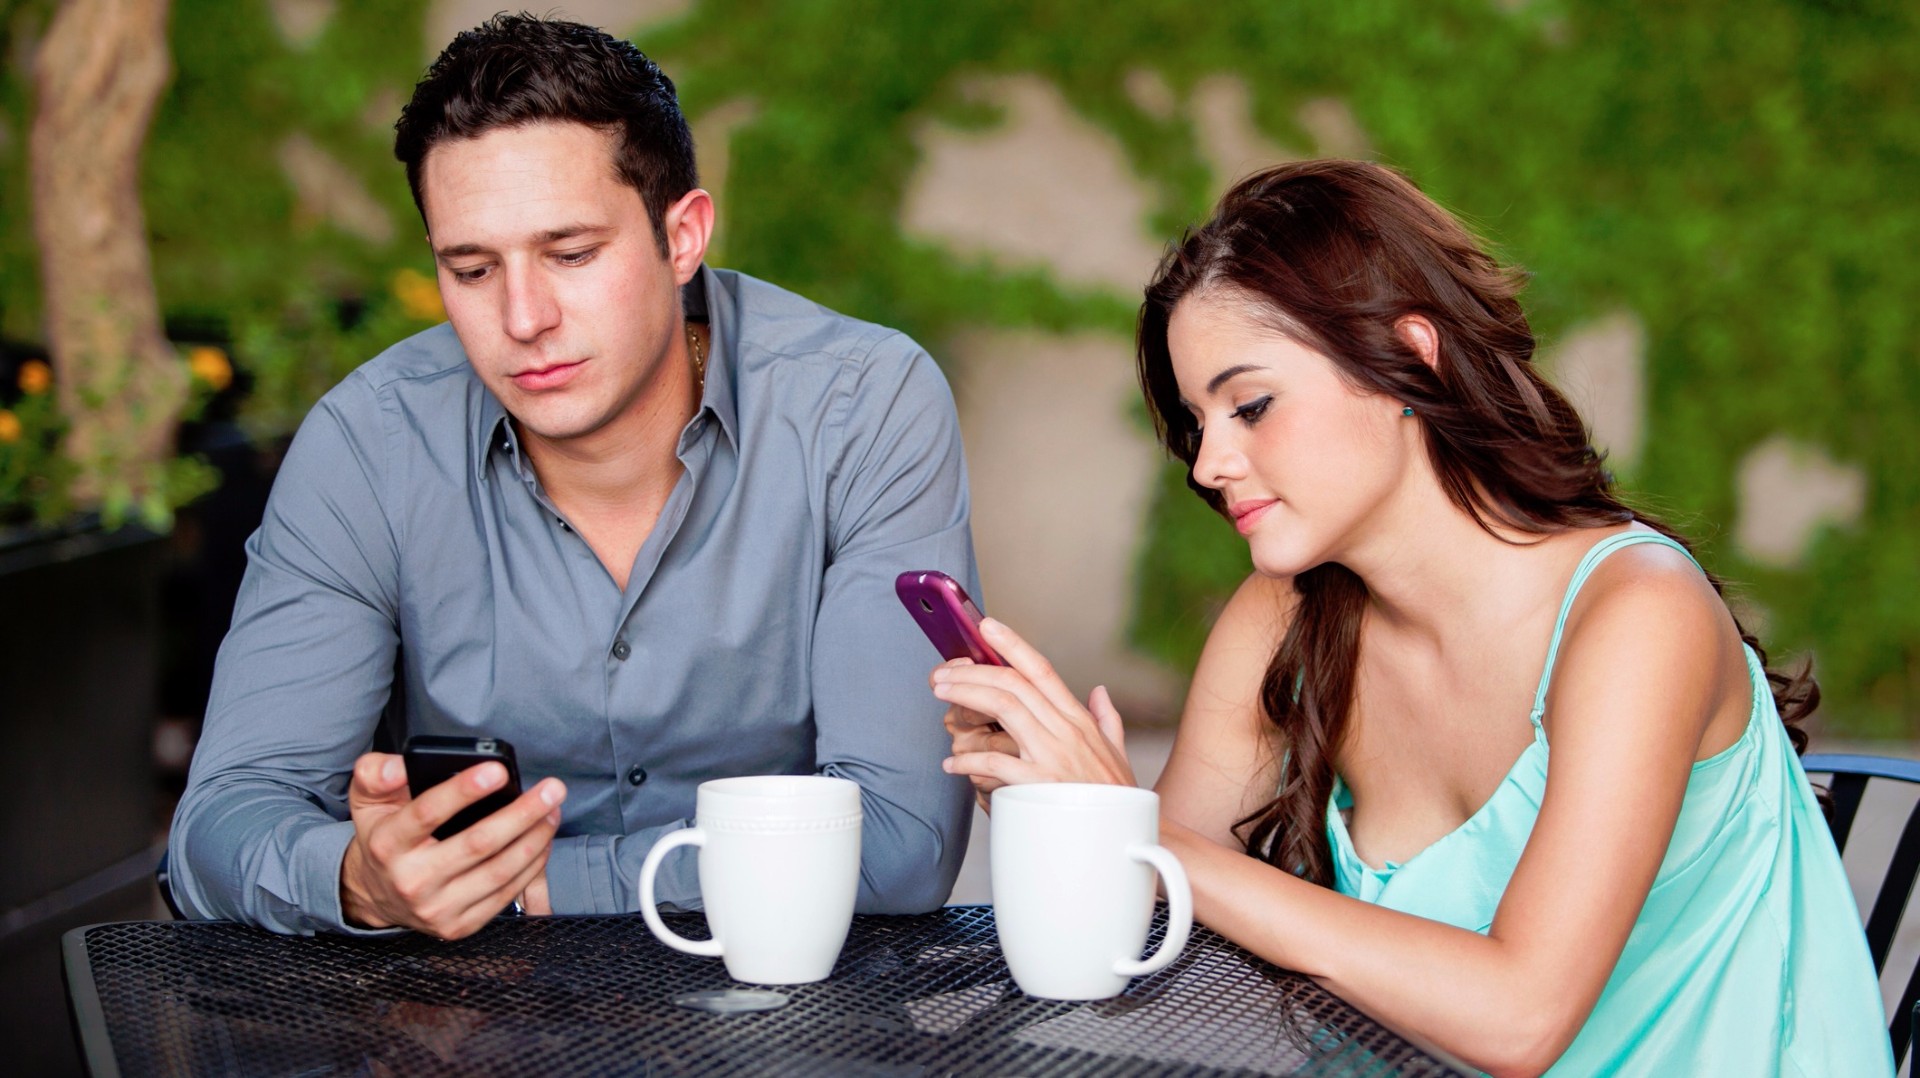 Image result for texting on a date